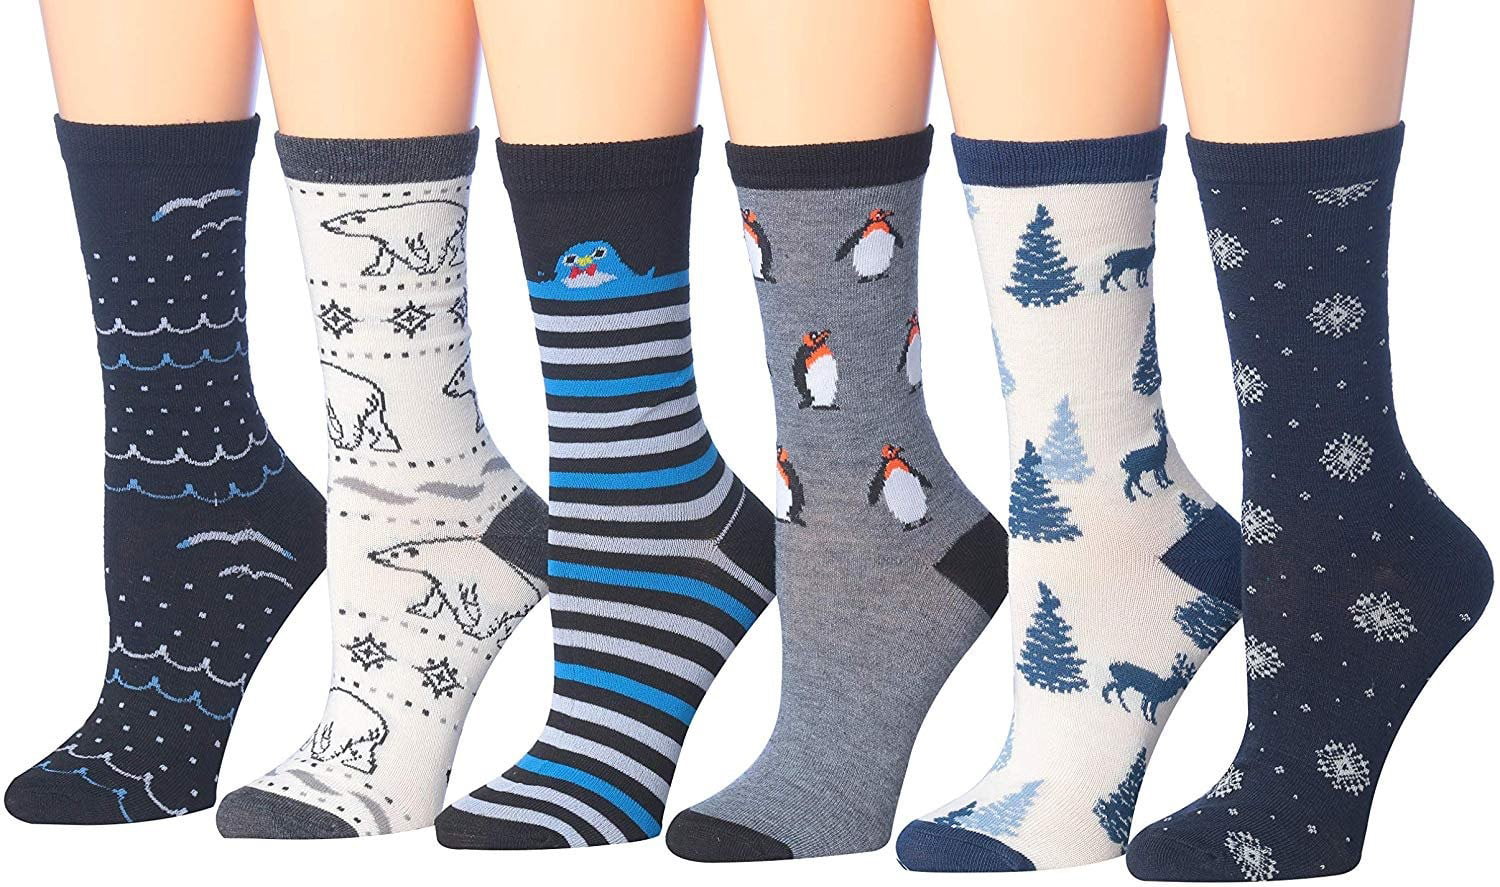 Tipi Toe Women's 6-Pairs Colorful Patterned Crew Socks 